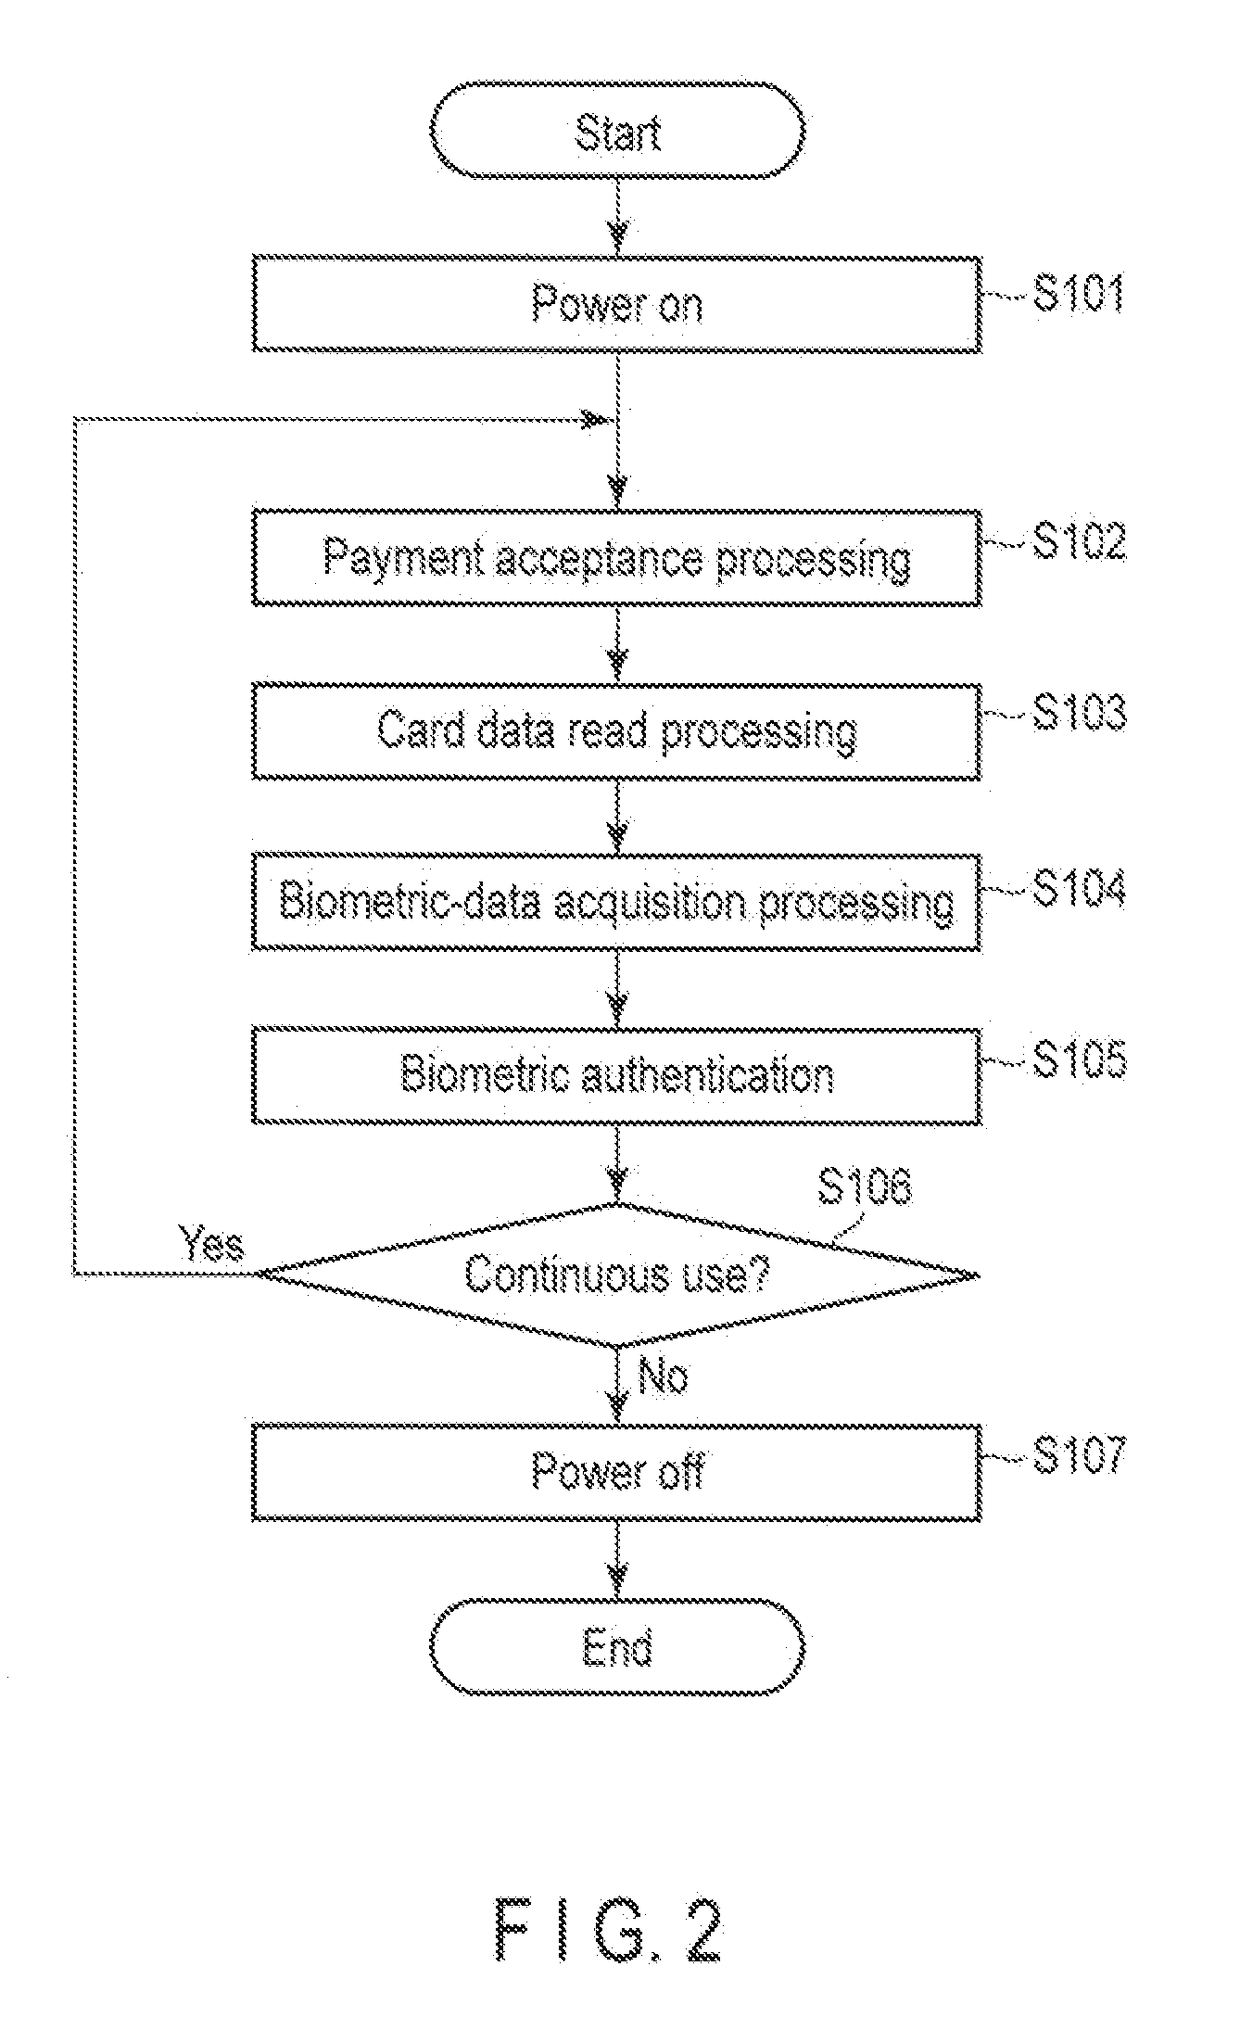 Card payment device and card payment system